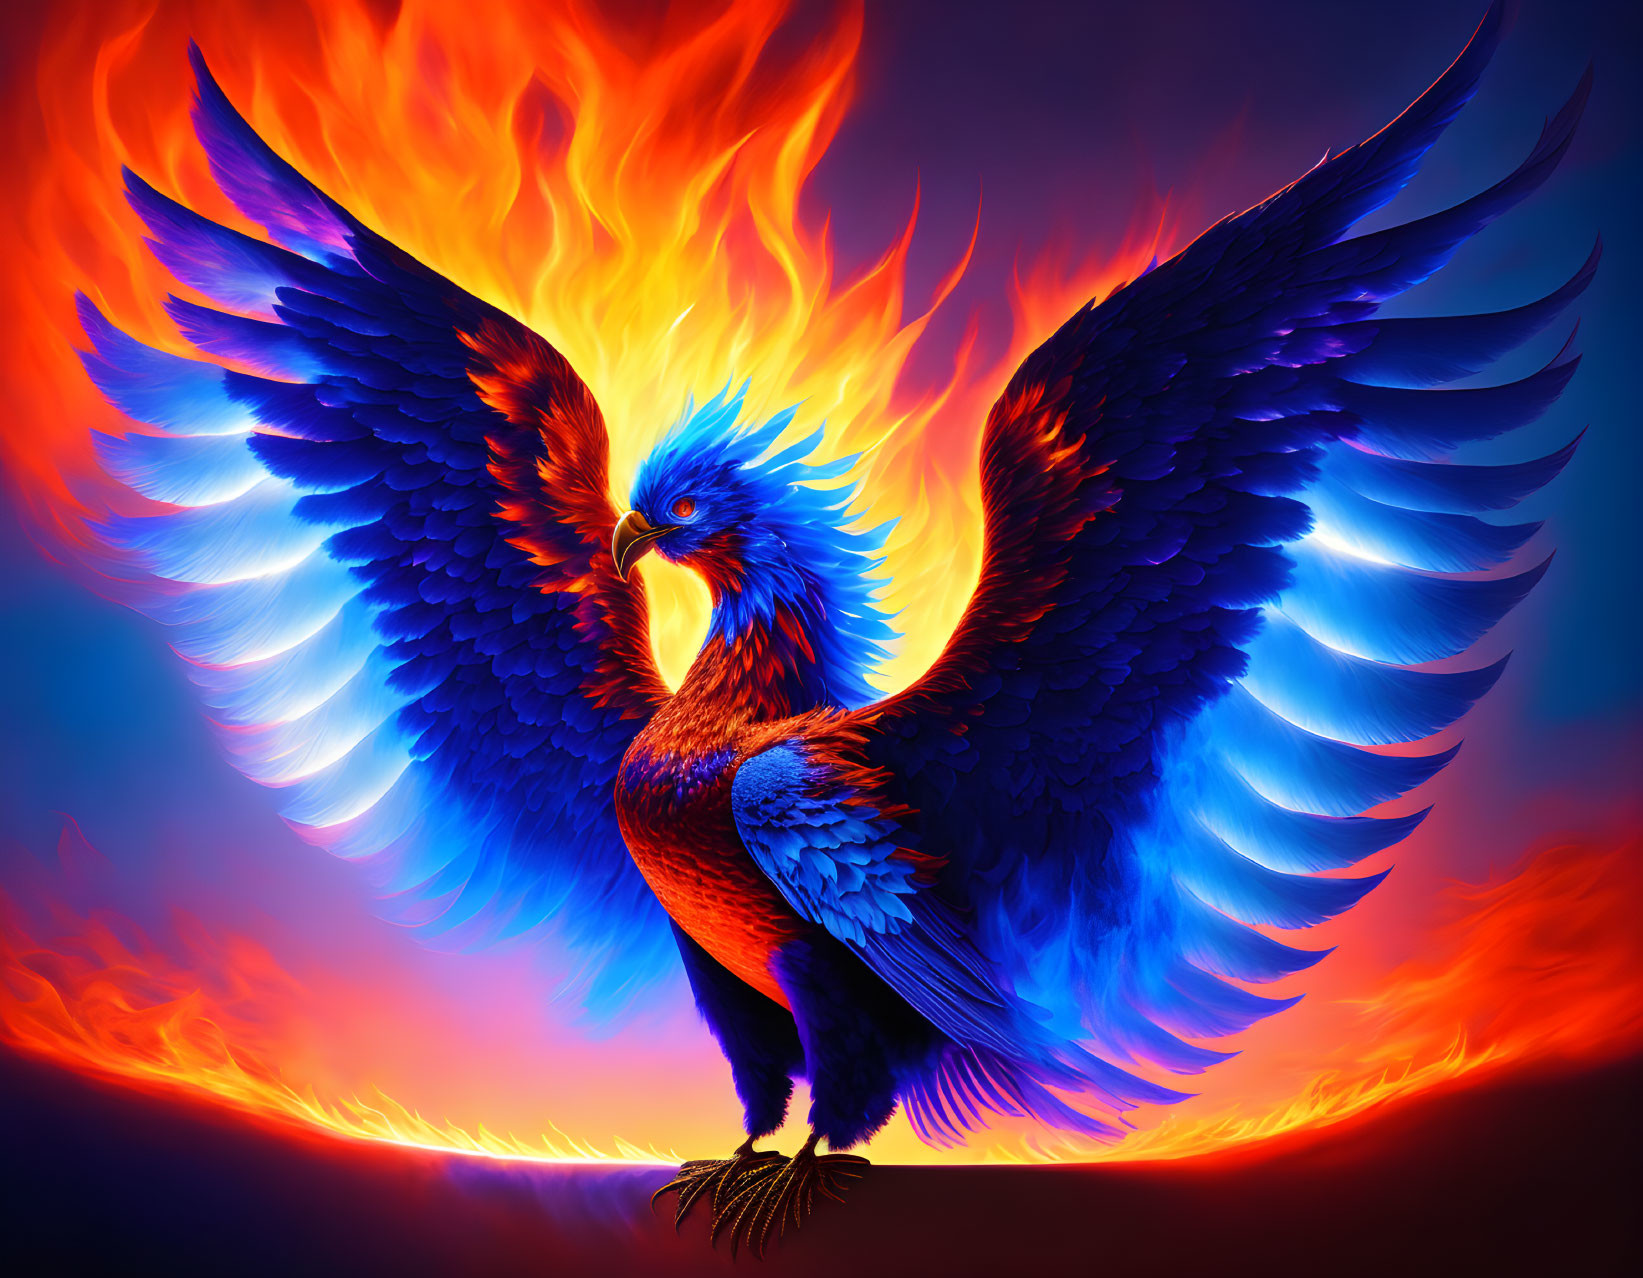 Colorful Phoenix with Fiery Wings on Dark Background